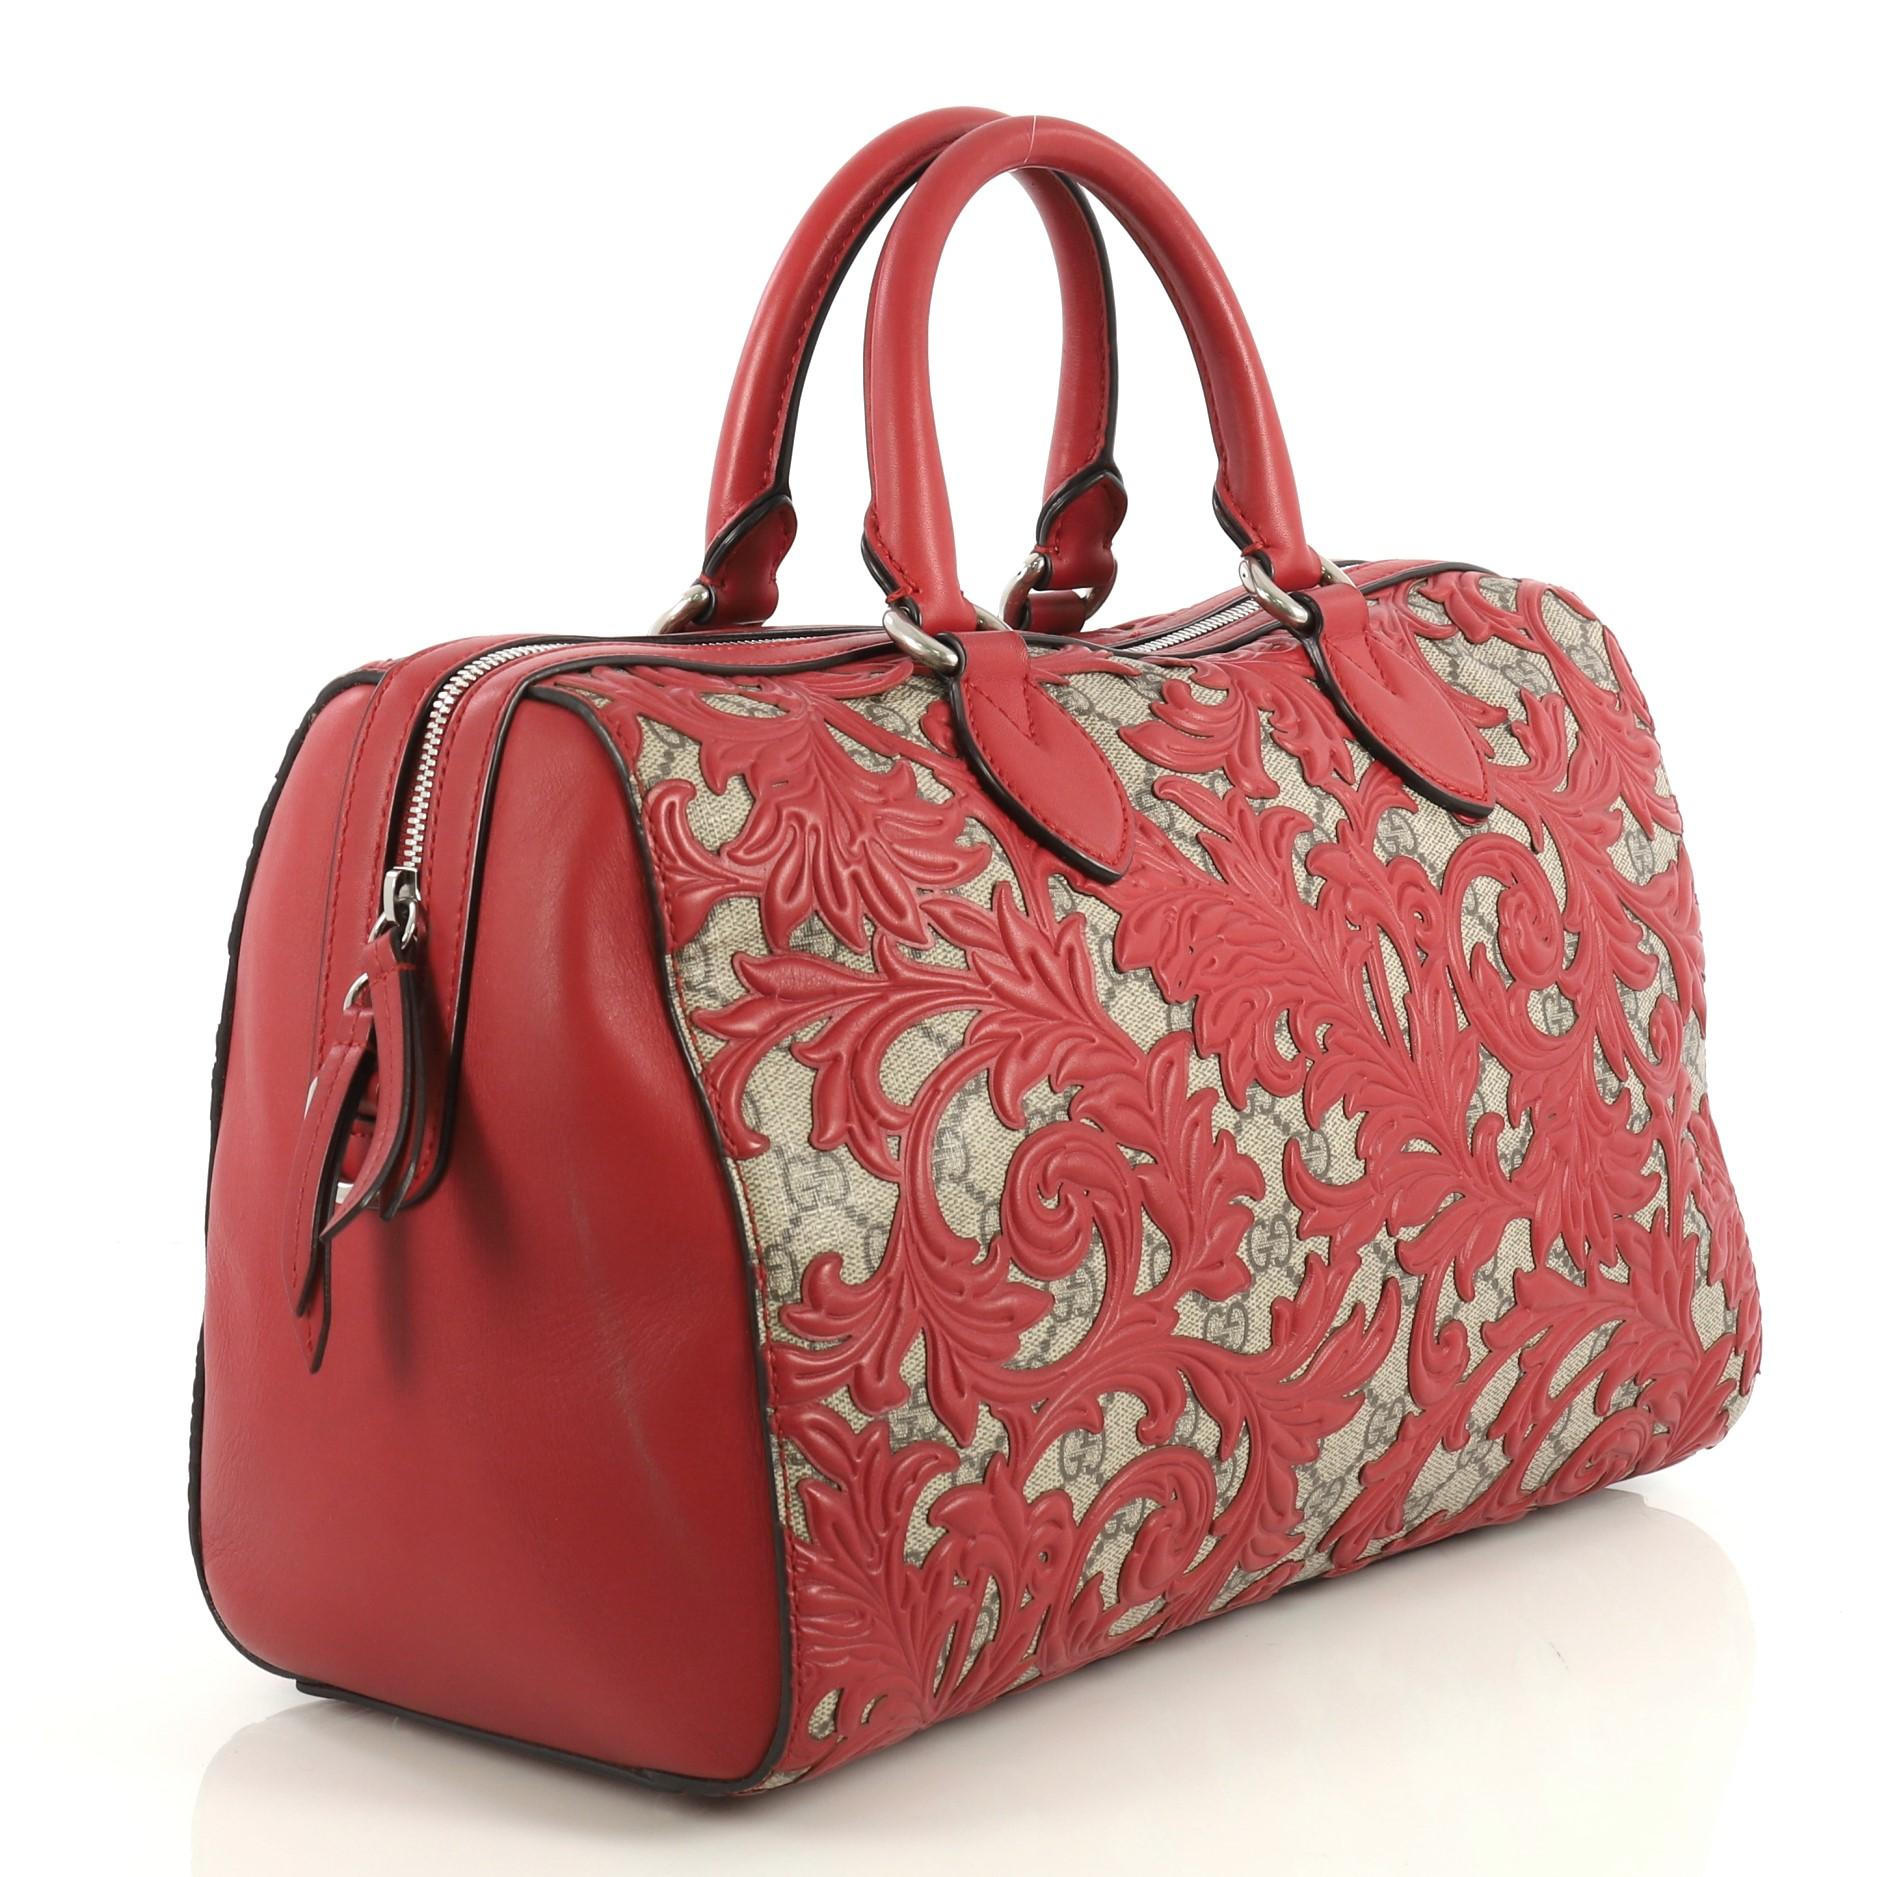 This Gucci Convertible Boston Bag Arabesque GG Coated Canvas Medium, crafted from brown GG supreme coated canvas with an overlay of red leather floral Arabesque pattern, features dual rolled leather handles and silver-tone hardware. Its zip closure